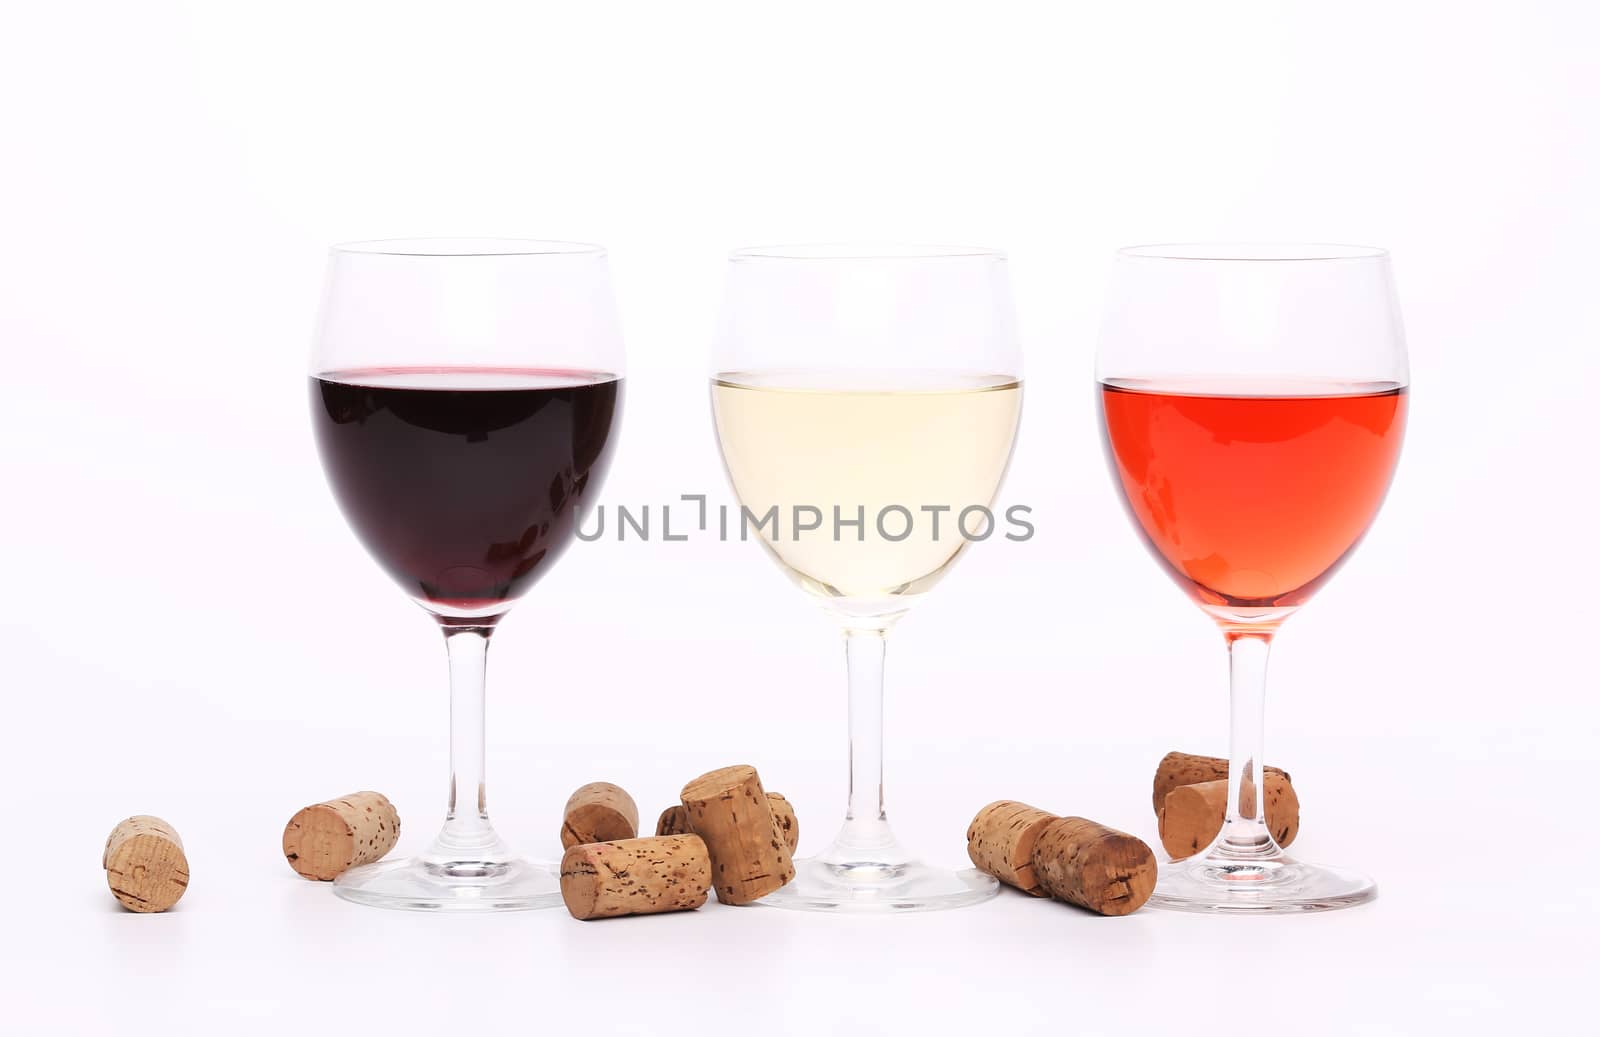 Three wine glasses and corks on the background.